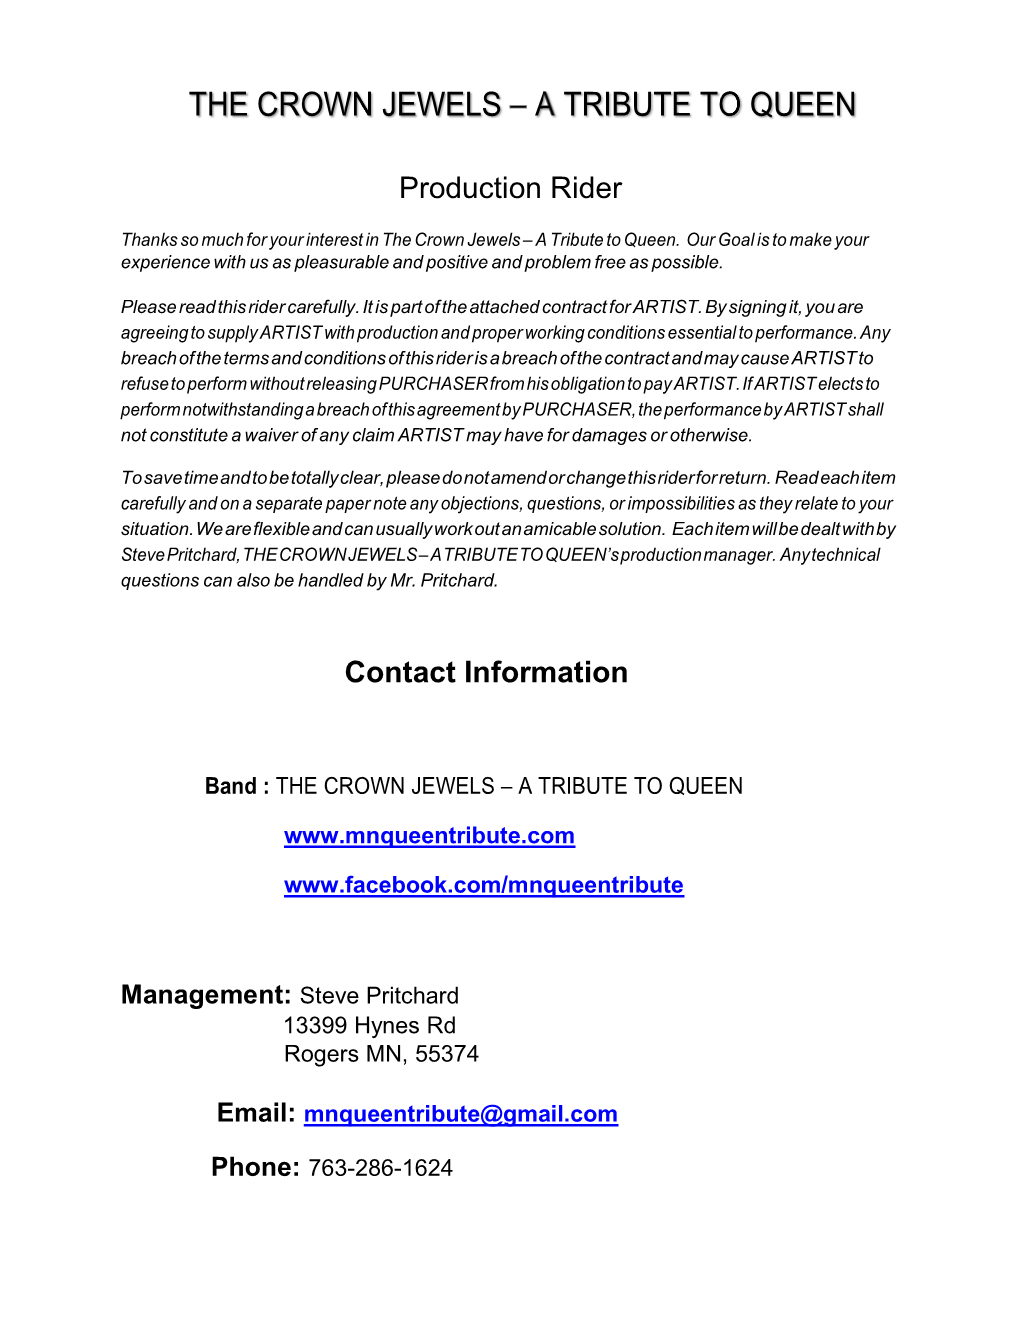 Production Rider Contact Information